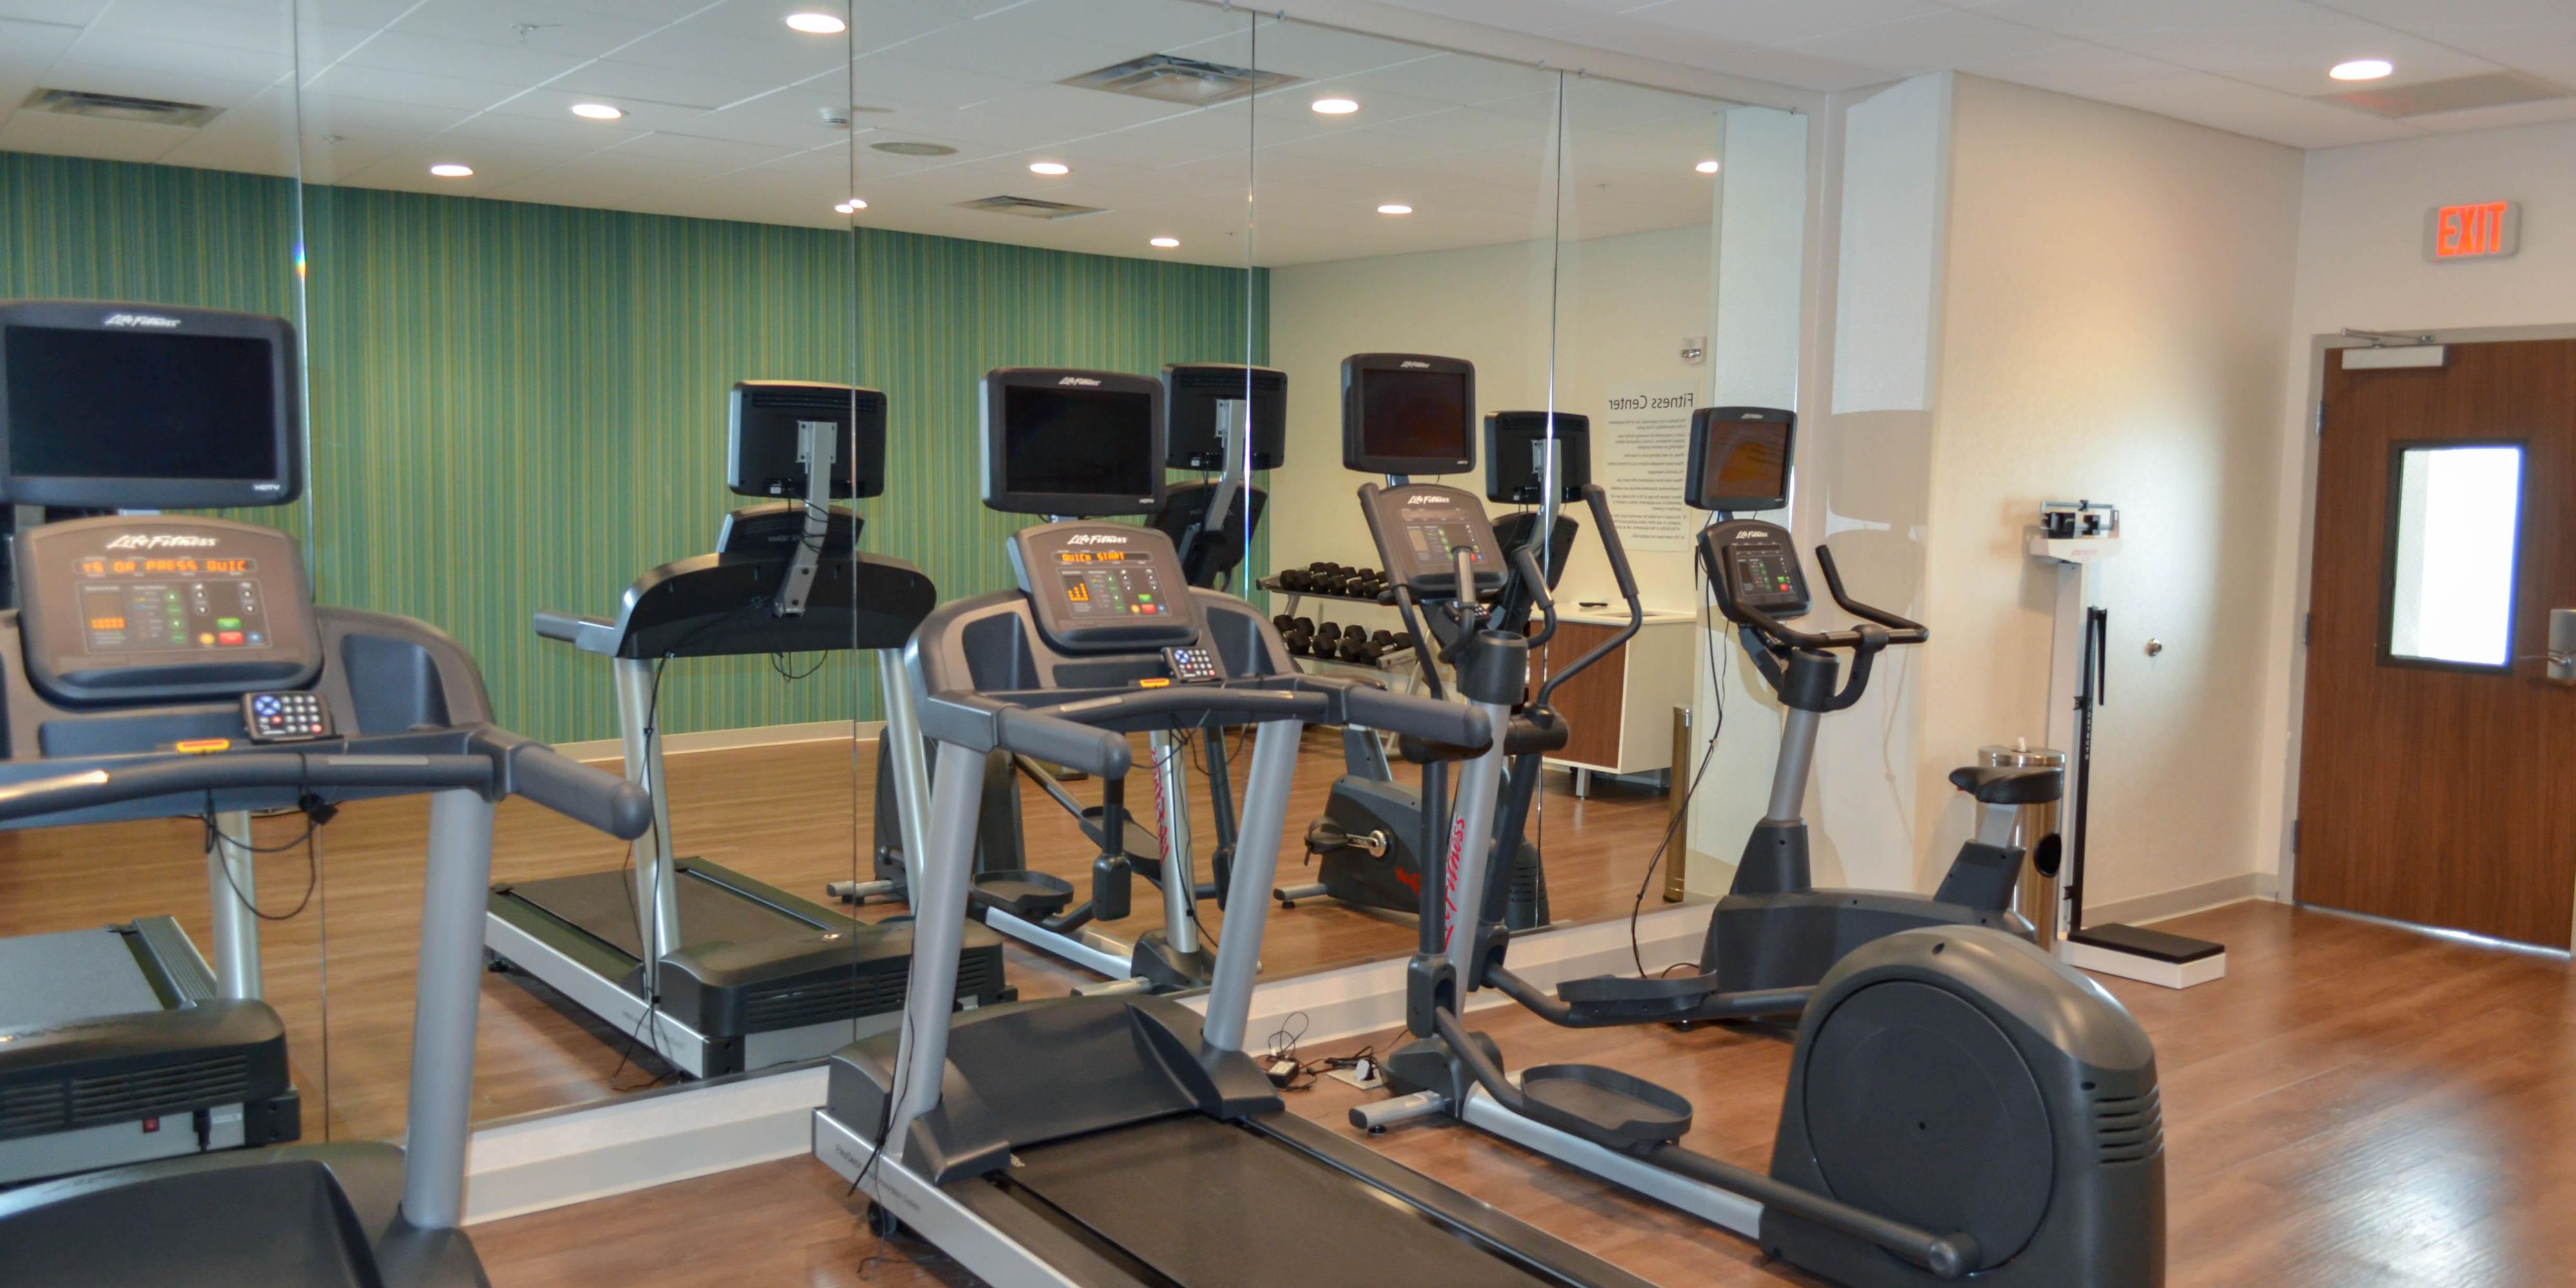 We know your schedule is not always your own! 24 Hour access lets You Be You and work when your schedule allows! Our new fitness center provides what you need! Ellipticals, Treadmills, Weights... whatever you need! 